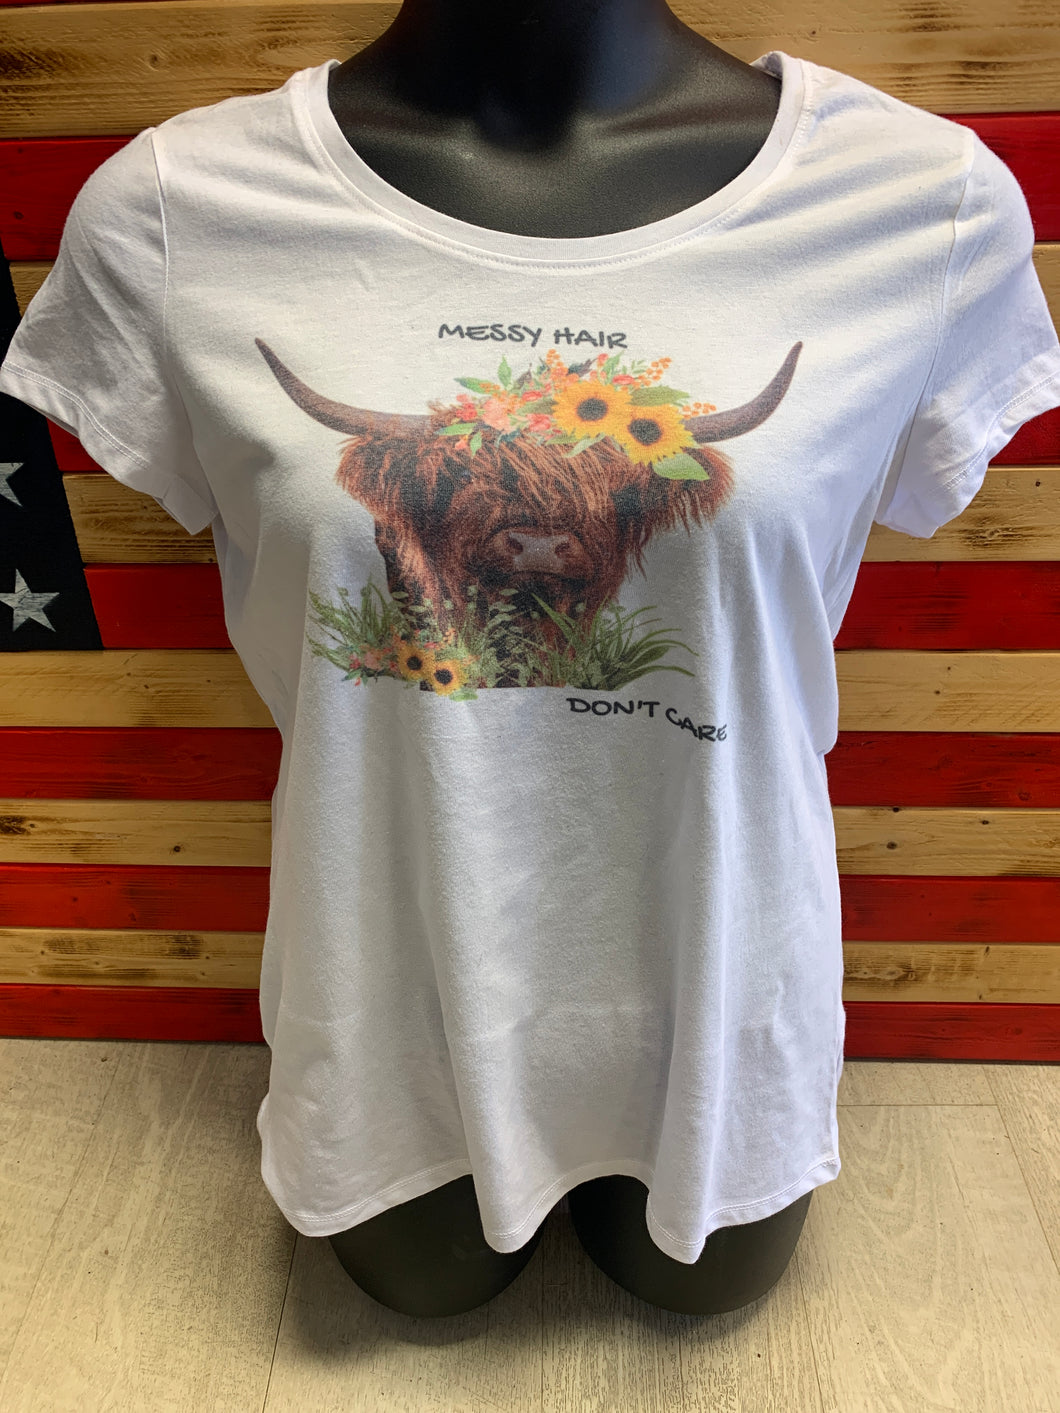 Messy hair don’t care (sunflower) t-shirt